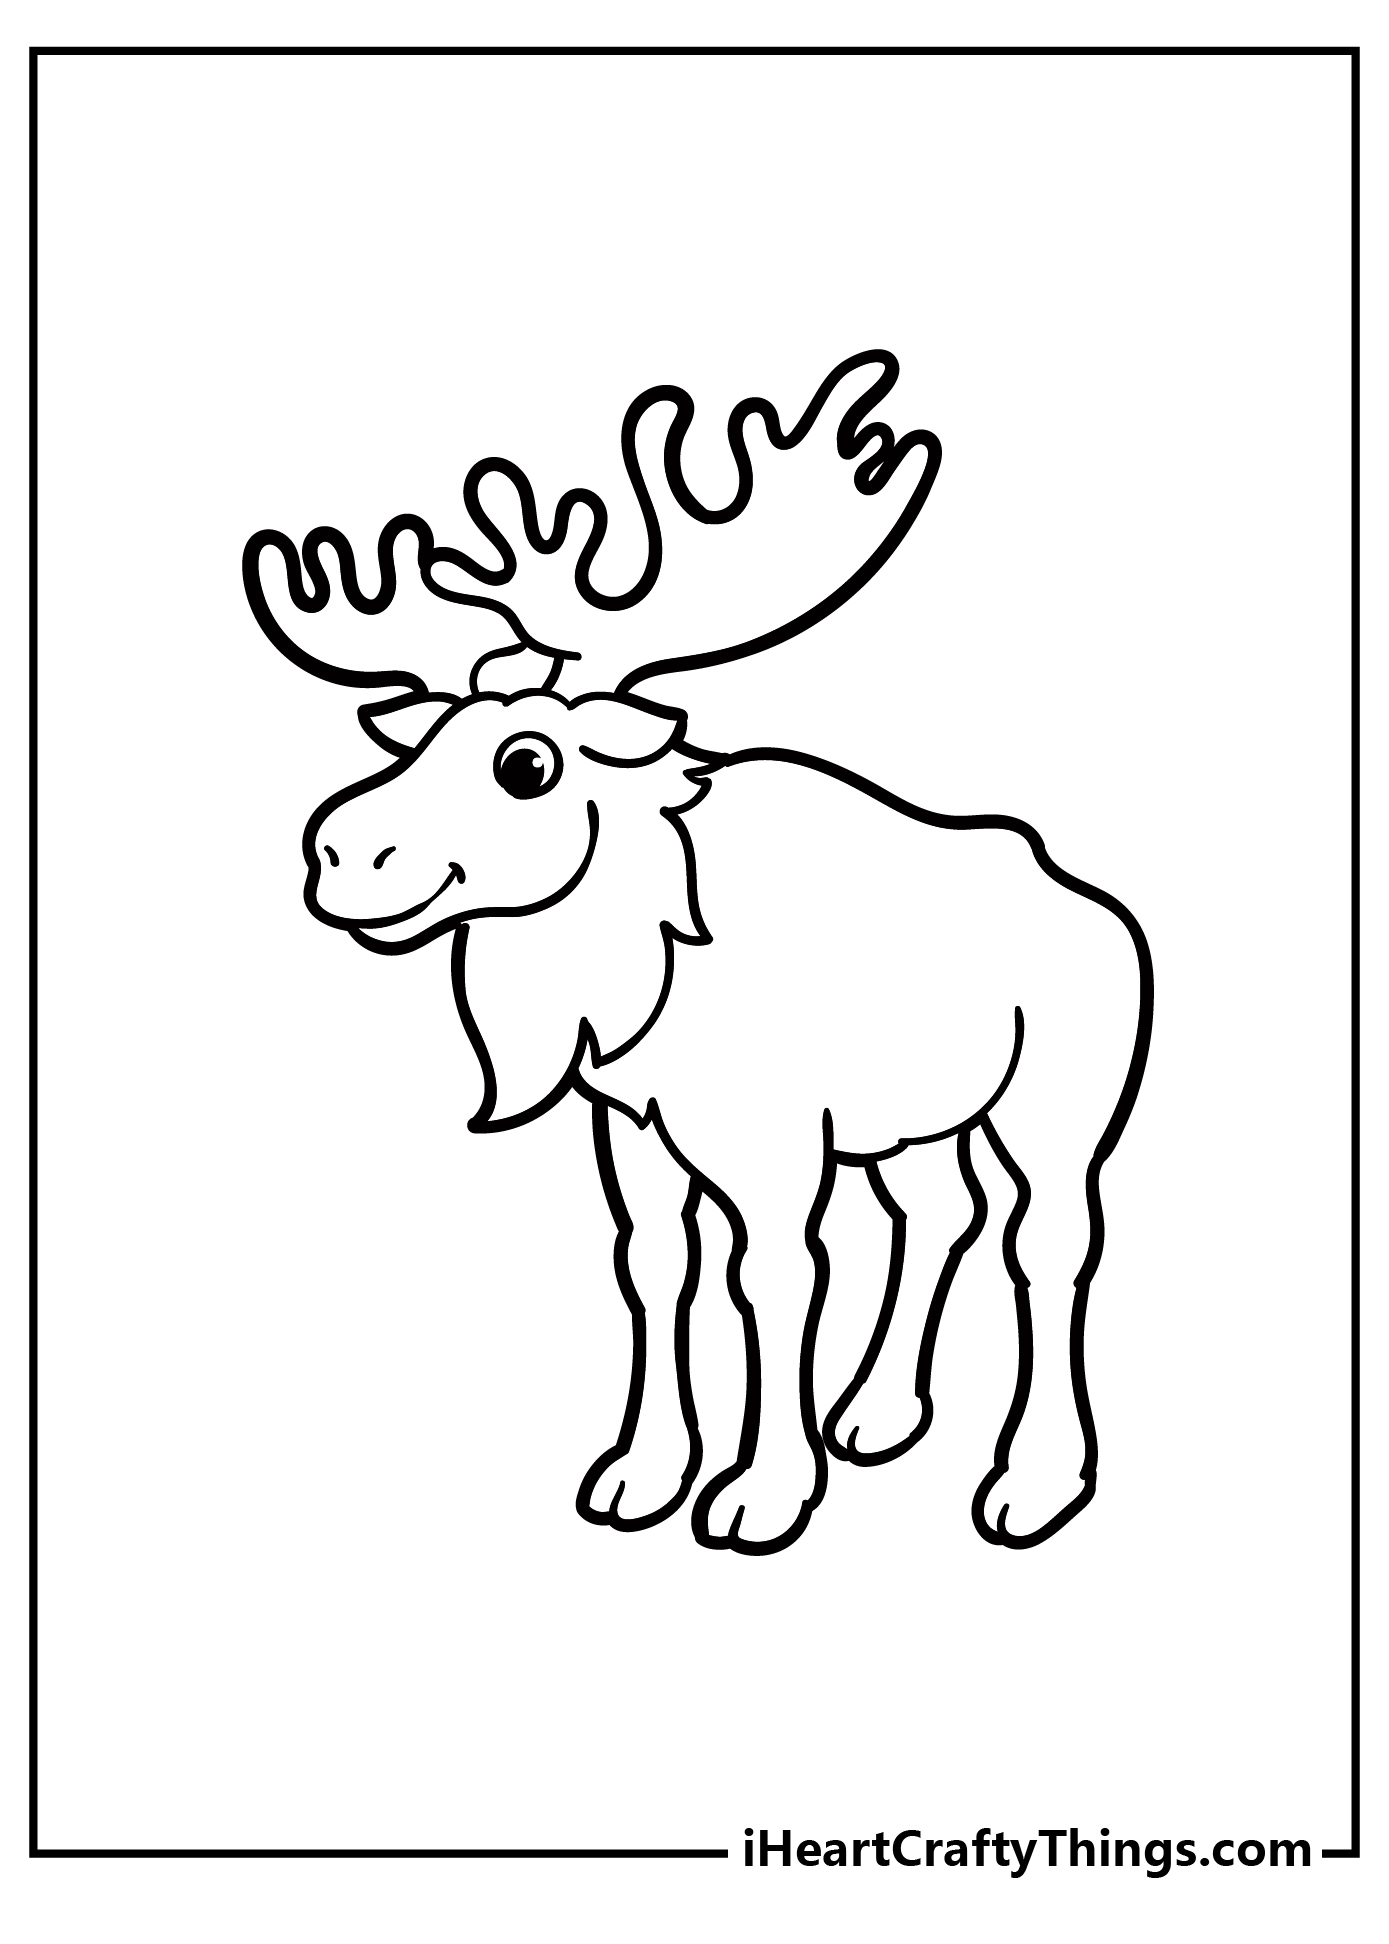 Moose Coloring Pages for adults free printable